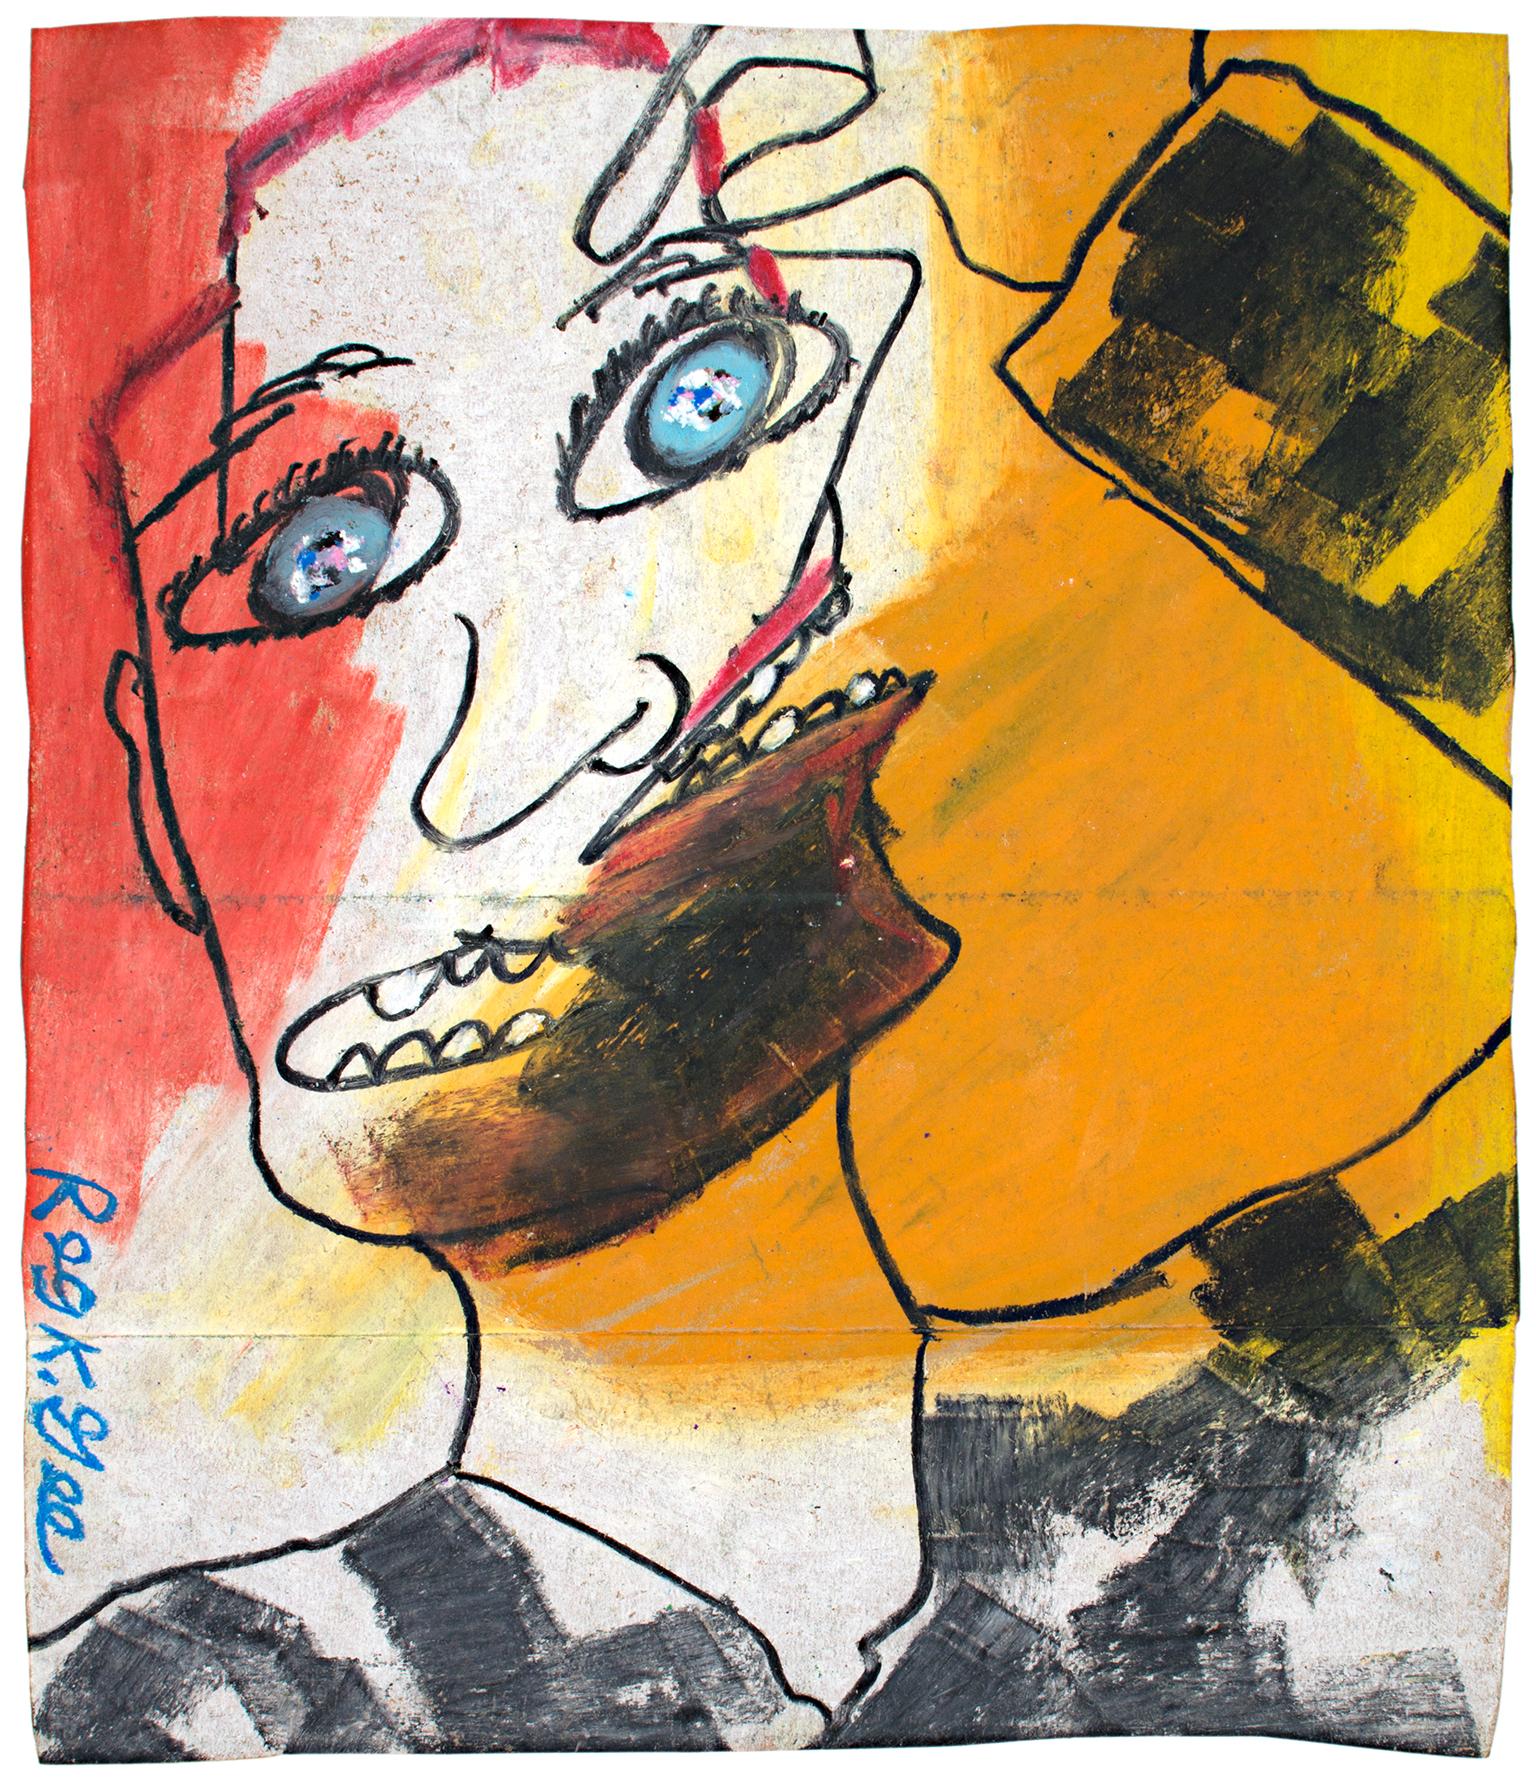 "Double Opinion" is an original oil pastel drawing on a grocery bag by Reginald K. Gee. The artist signed the piece lower left. It depicts a confused and wide-eyed face with two mouths, much like the artworks of Pablo Picasso. 

14" x 12" art
Custom